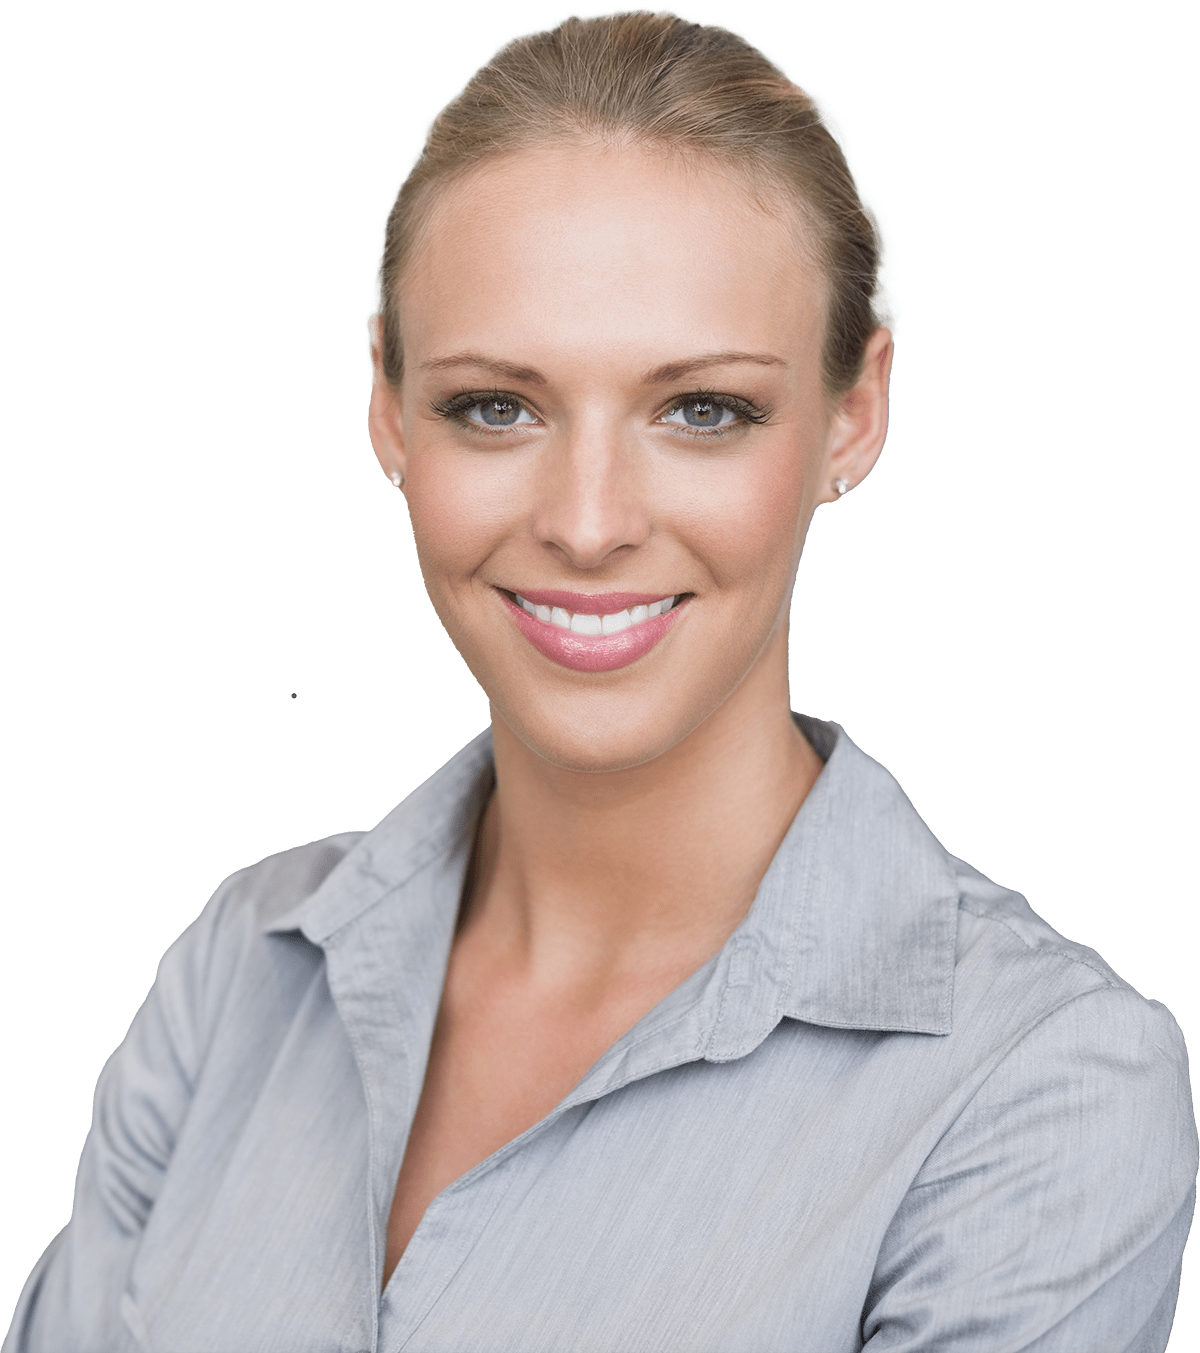 Smiling woman in a collared shirt